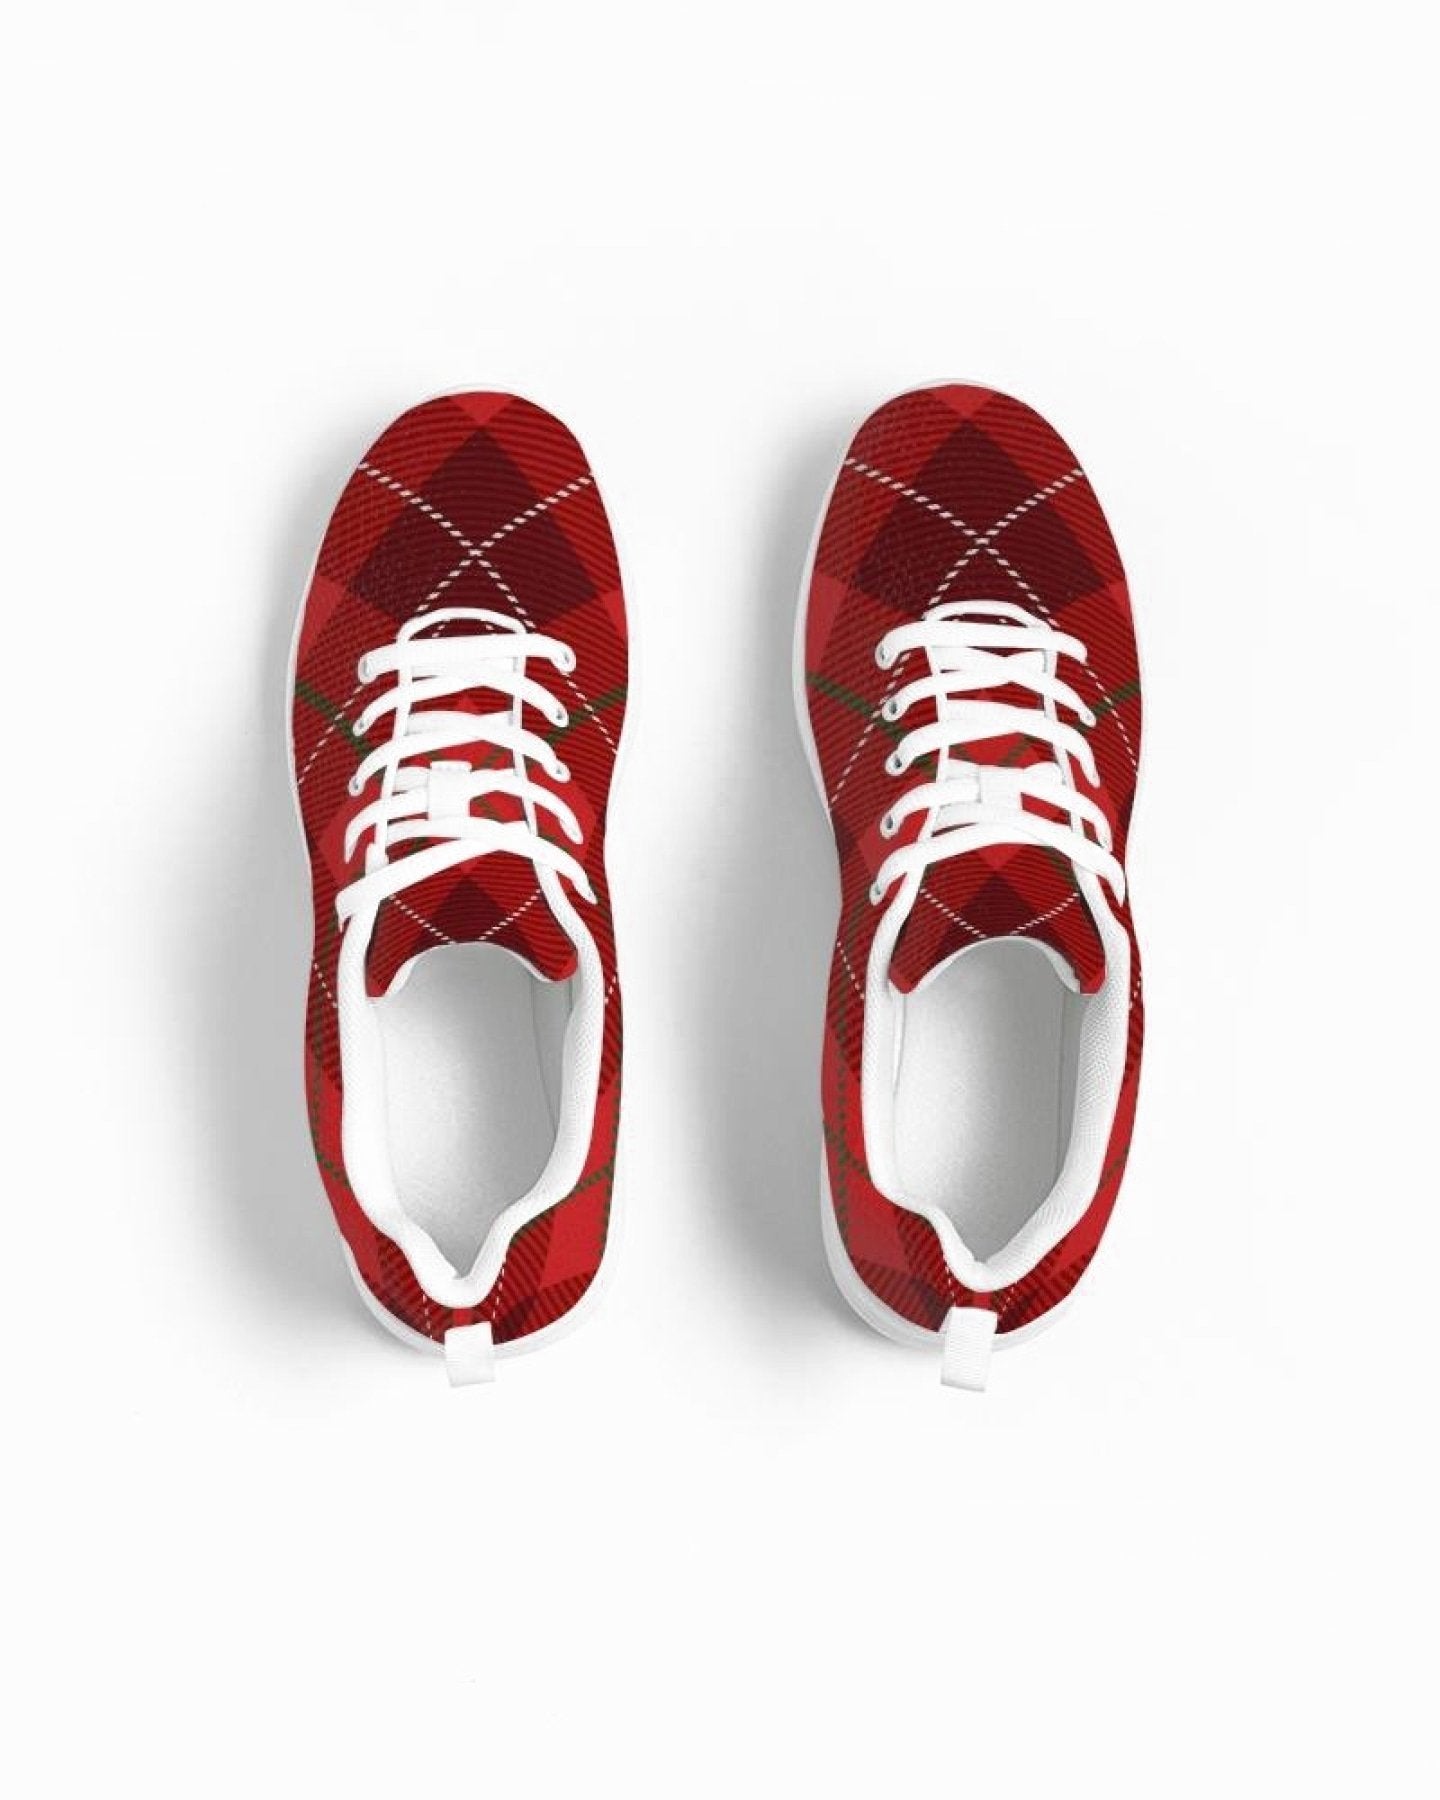 Uniquely You Womens Sneakers - Red Plaid Canvas Sports Shoes / Running - KRE Prime Deals